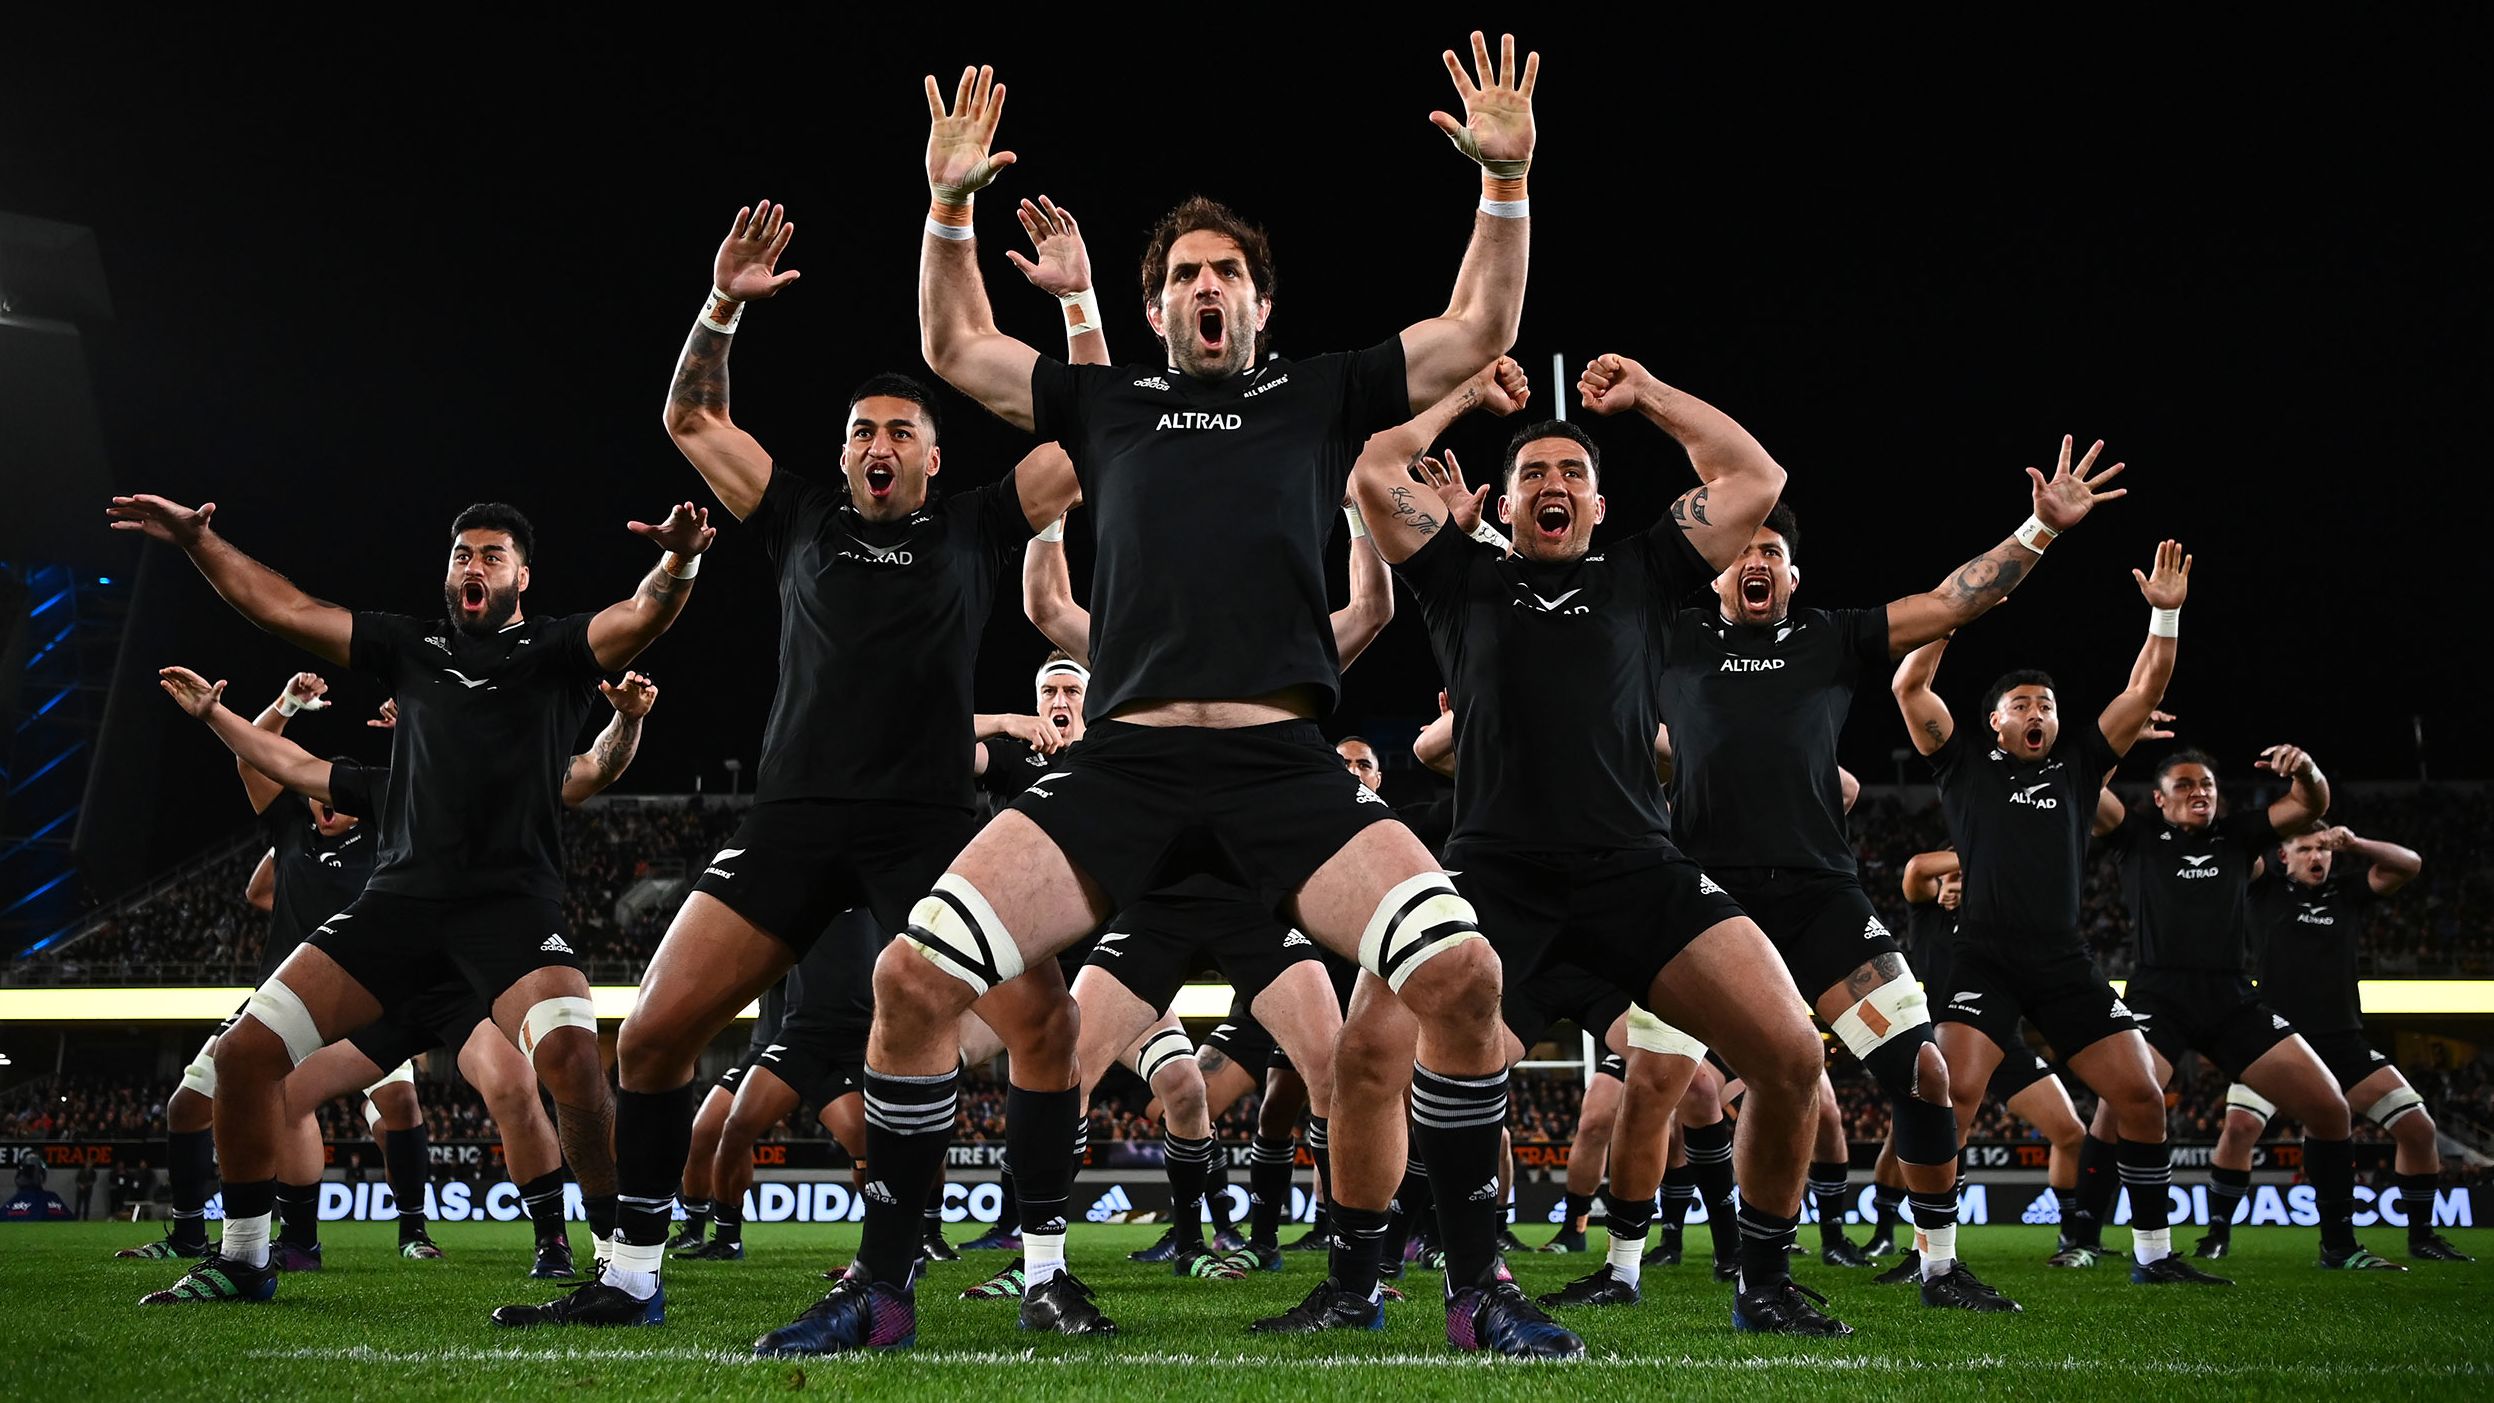 New Zealand's rugby team performs a traditional Haka dance before a match against Australia on Sunday, September 24.